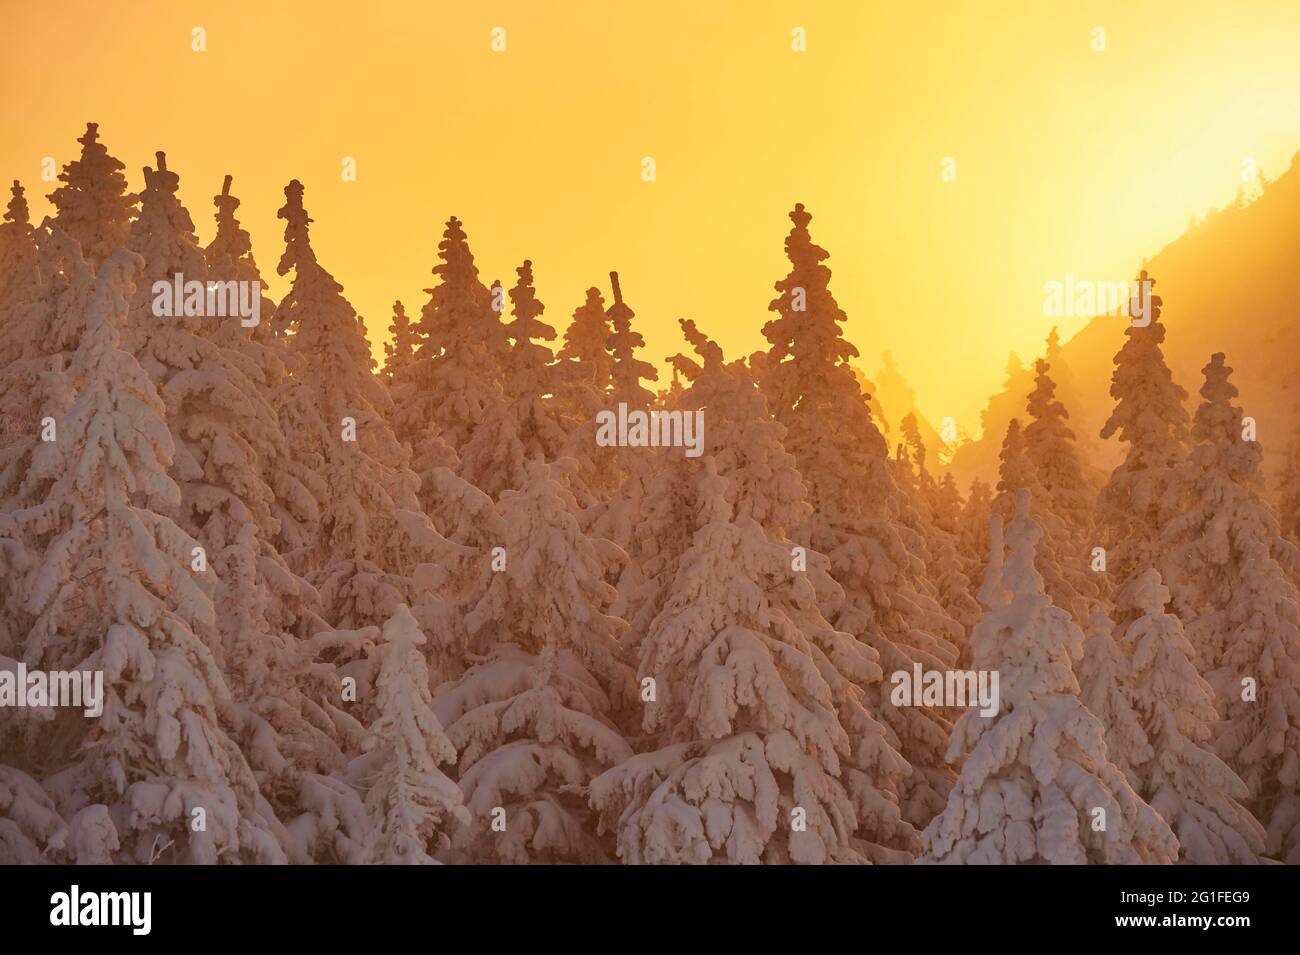 European spruce (Picea abies) trees in winter at sunrise, mount Arber, Bavarian Forest, Bavaria, Germany Stock Photo